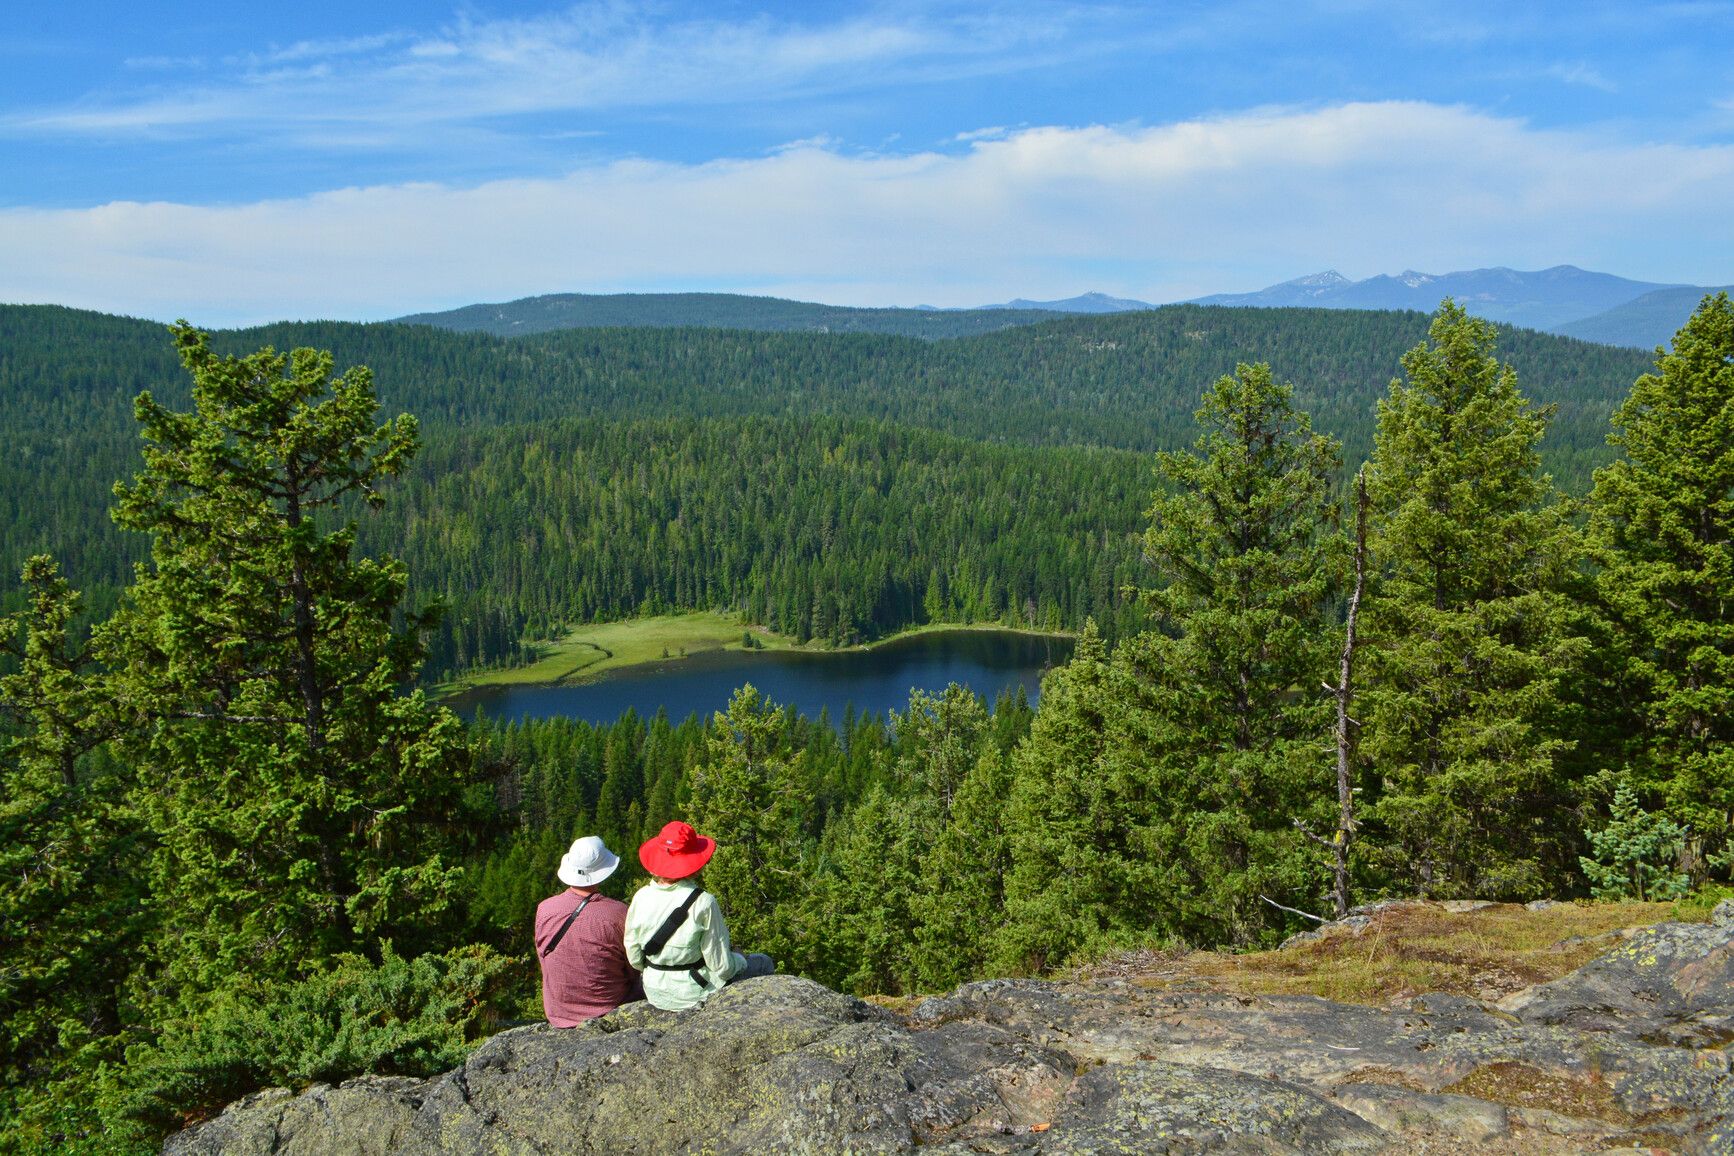 Check out the stunning view of Champion Lakes and the mountains from the mountain top.